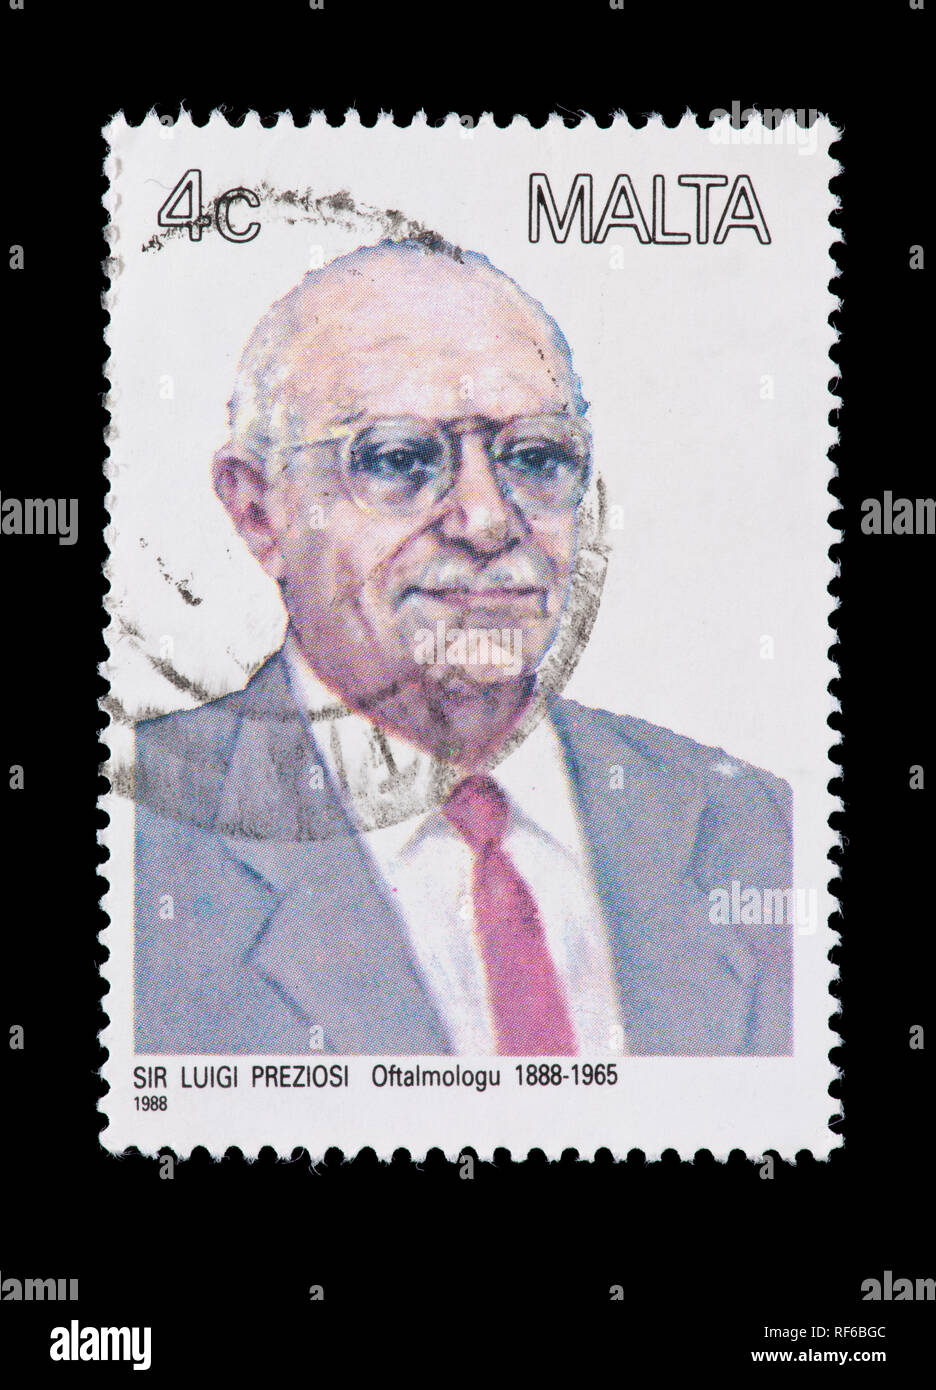 Postage stamp from from Malta depicting Sir Luigi Preziosi  ophthalmologist and glaucoma operation pioneer Stock Photo